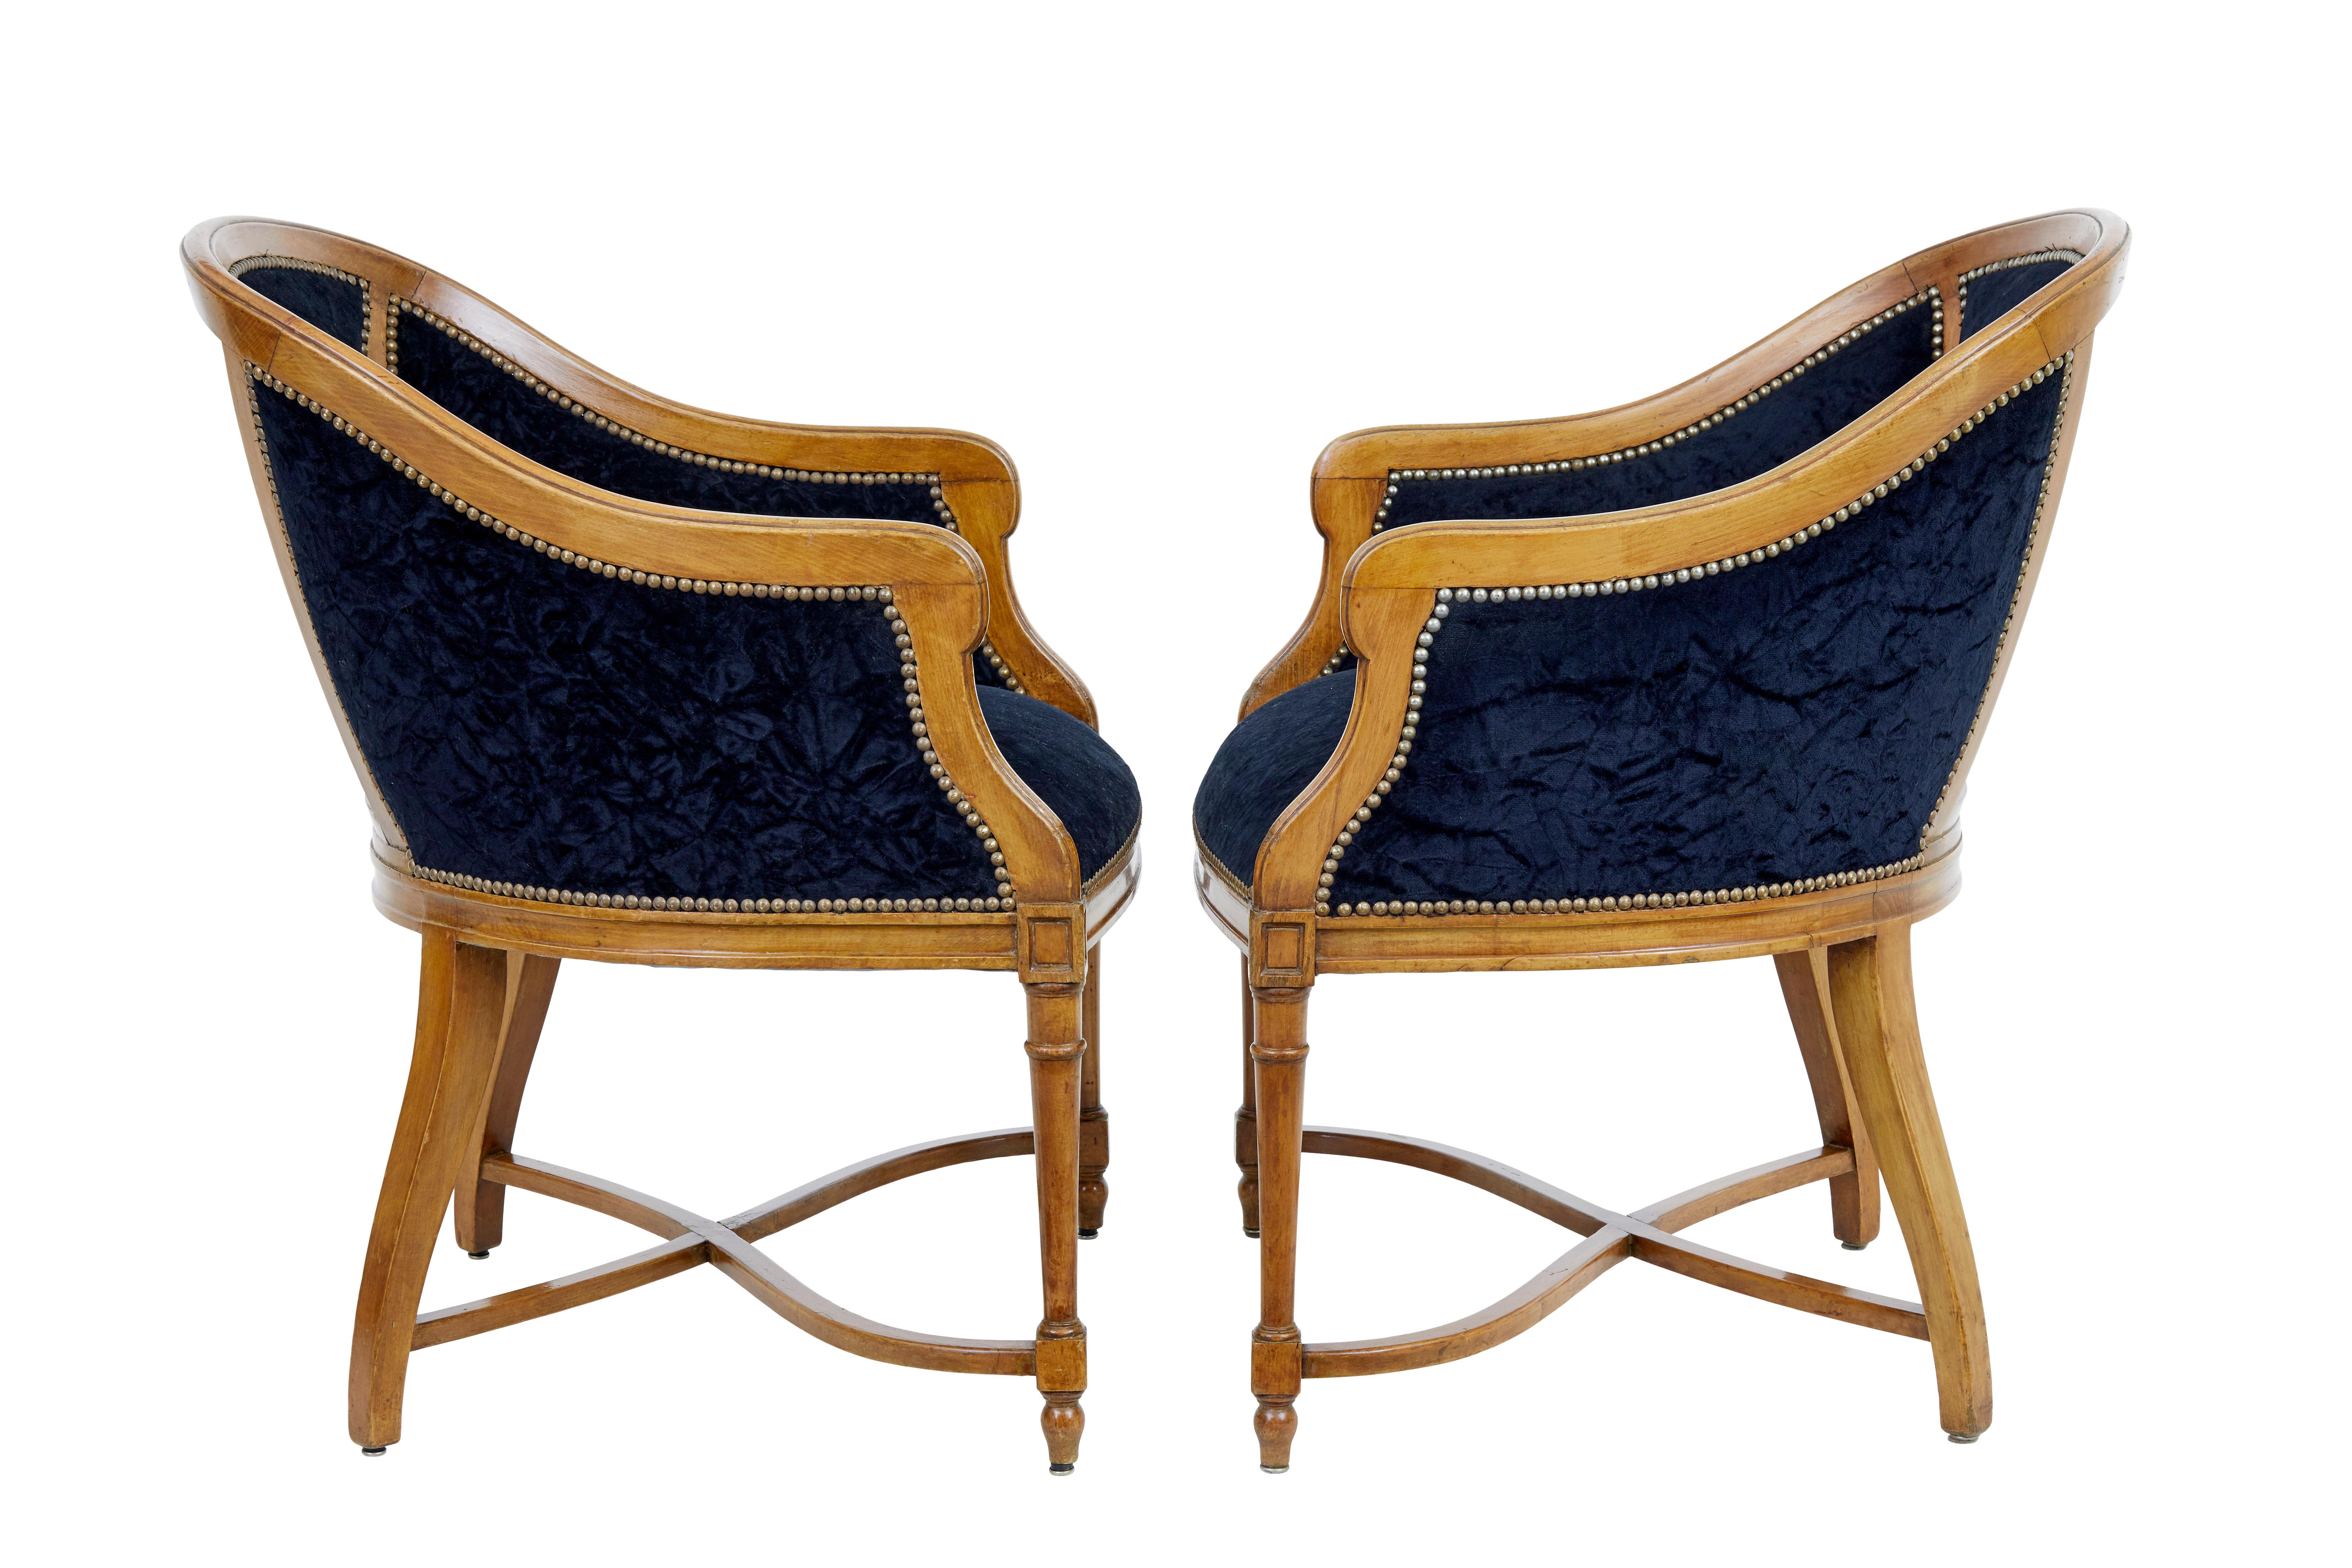 Aesthetic Movement Pair of early 20th century lounge chairs